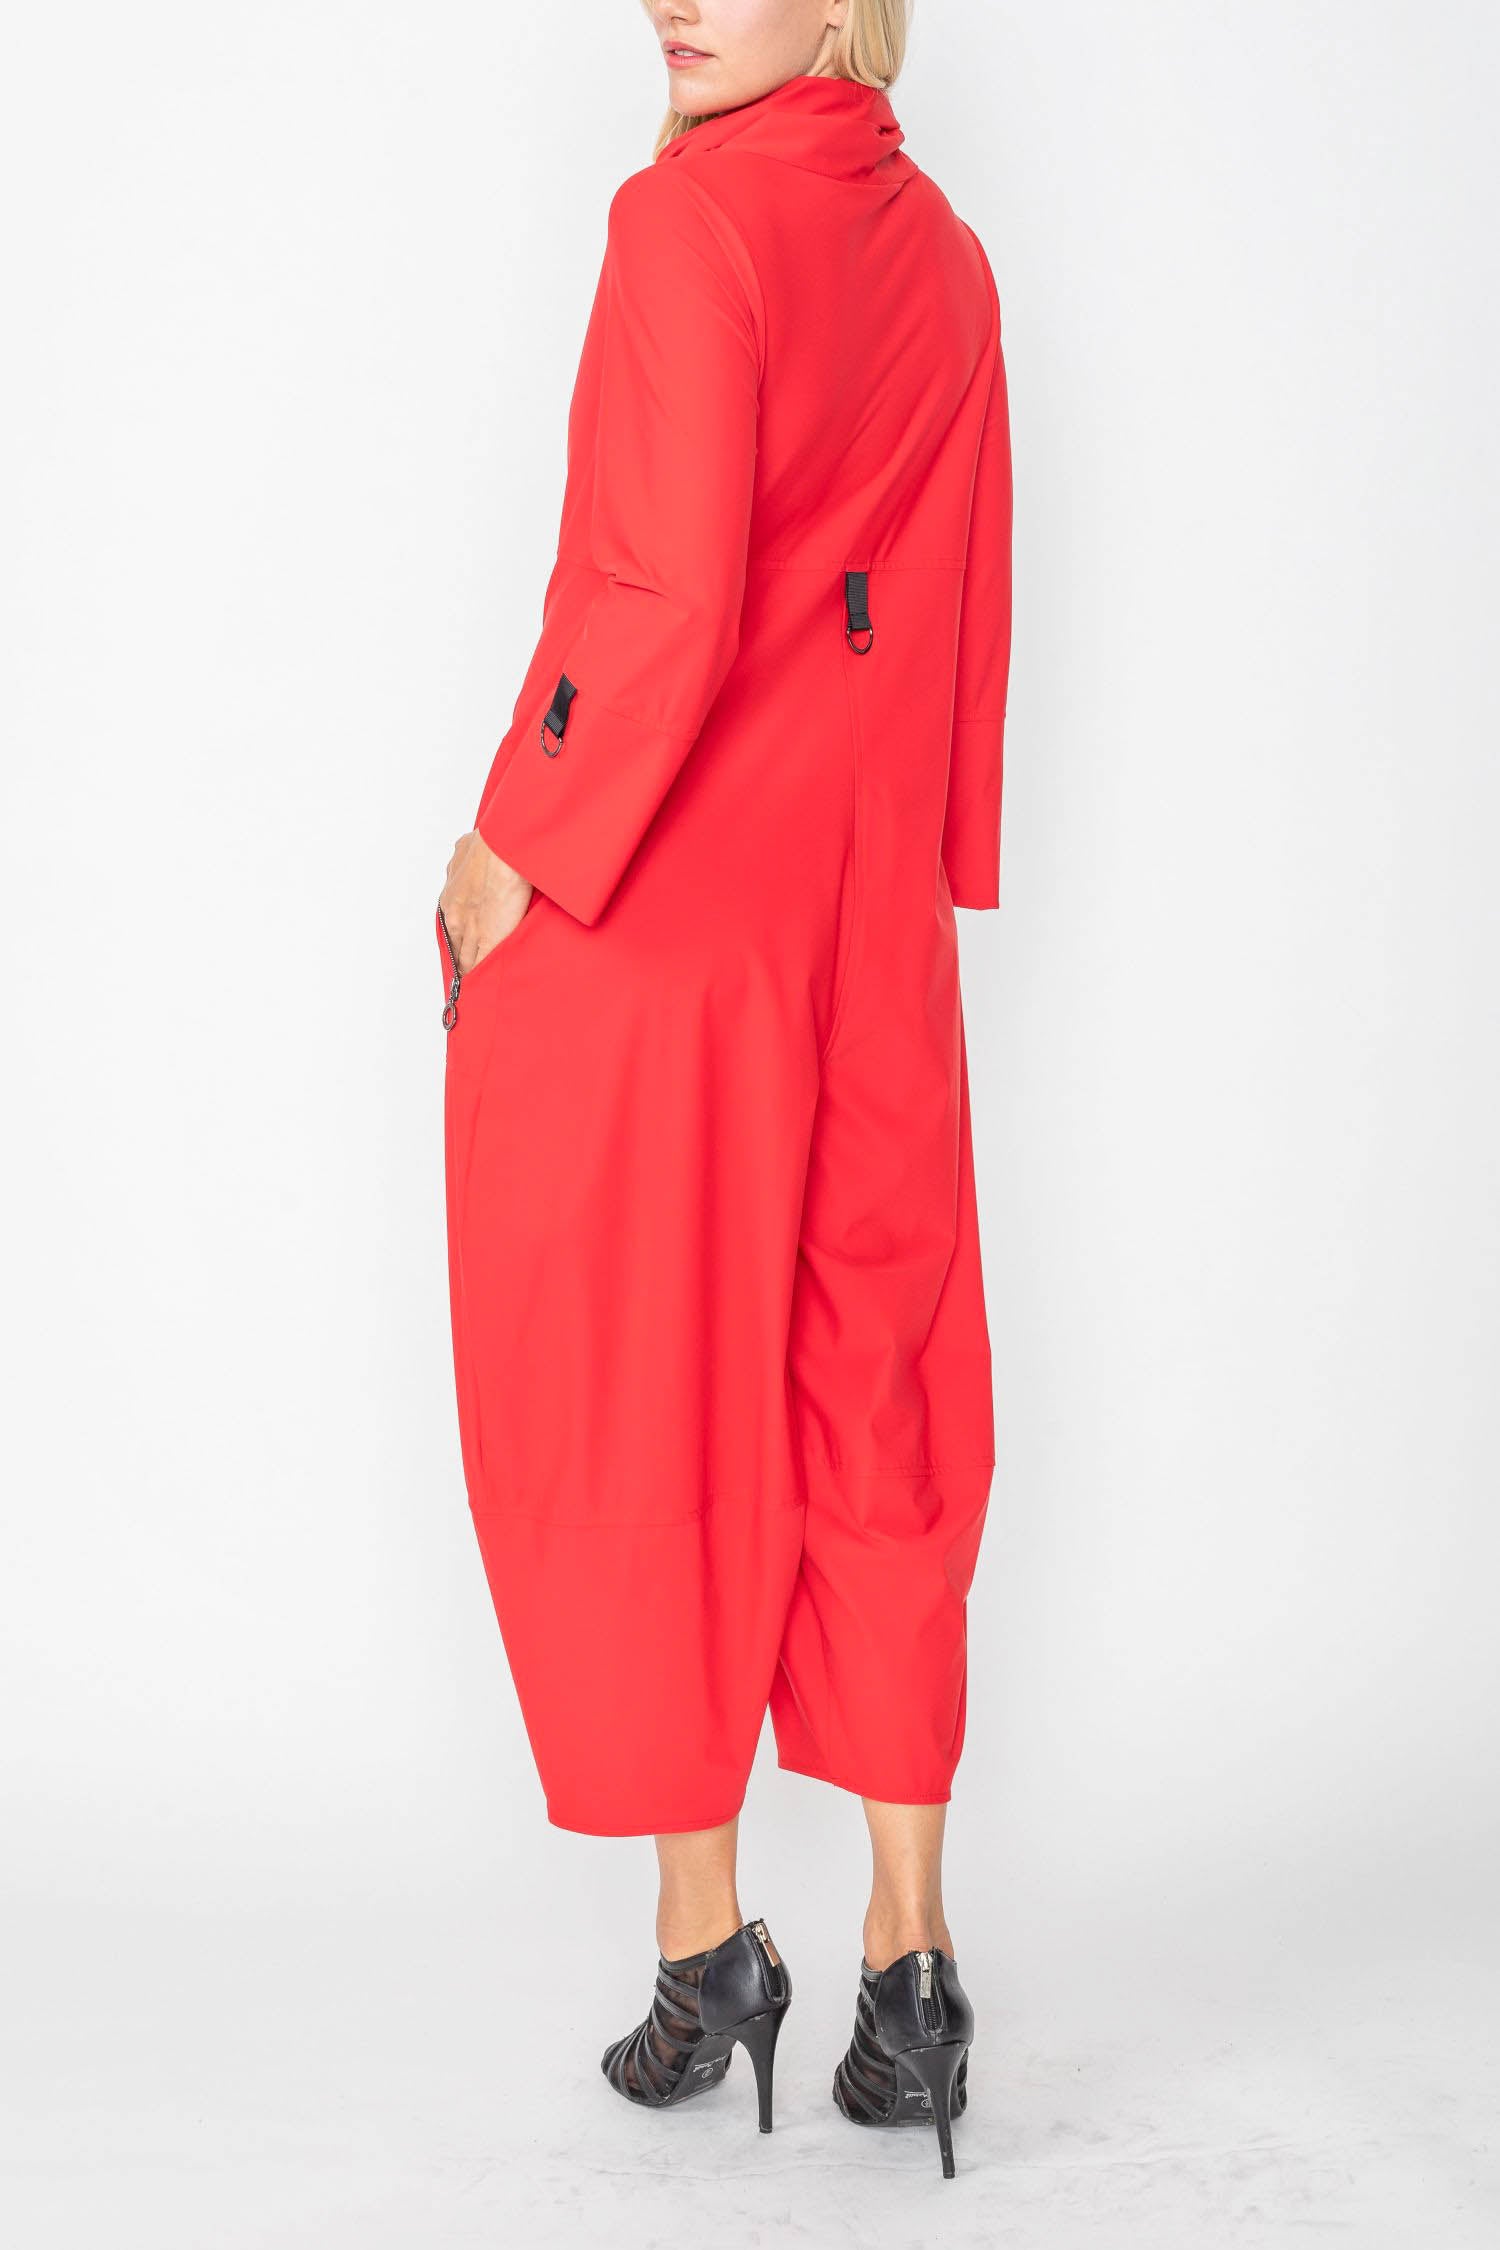 Red Zip-Up Front Cropped Long Sleeve Jumpsuit